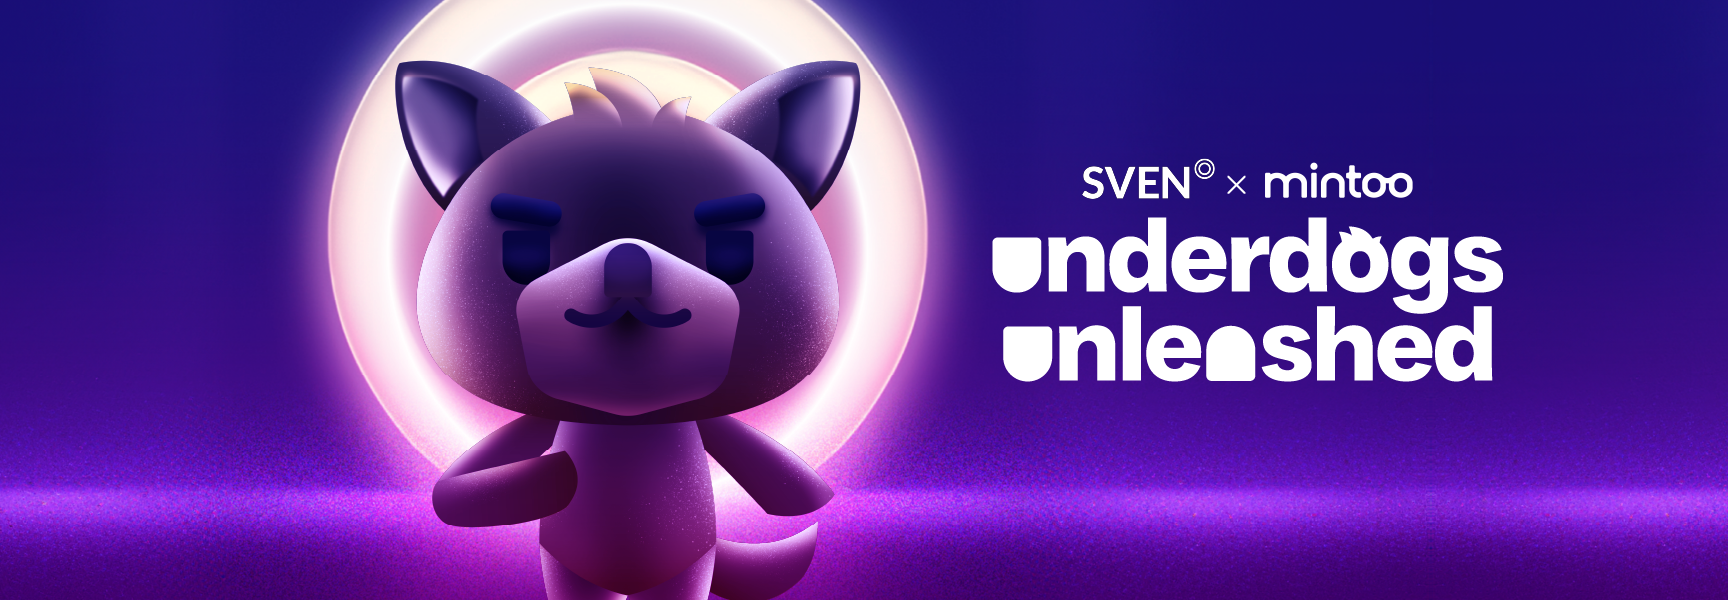 SVEN – The Digital 1st Agency launches first NFT collection in partnership with Mintoo: “Underdogs:Unleashed”! 